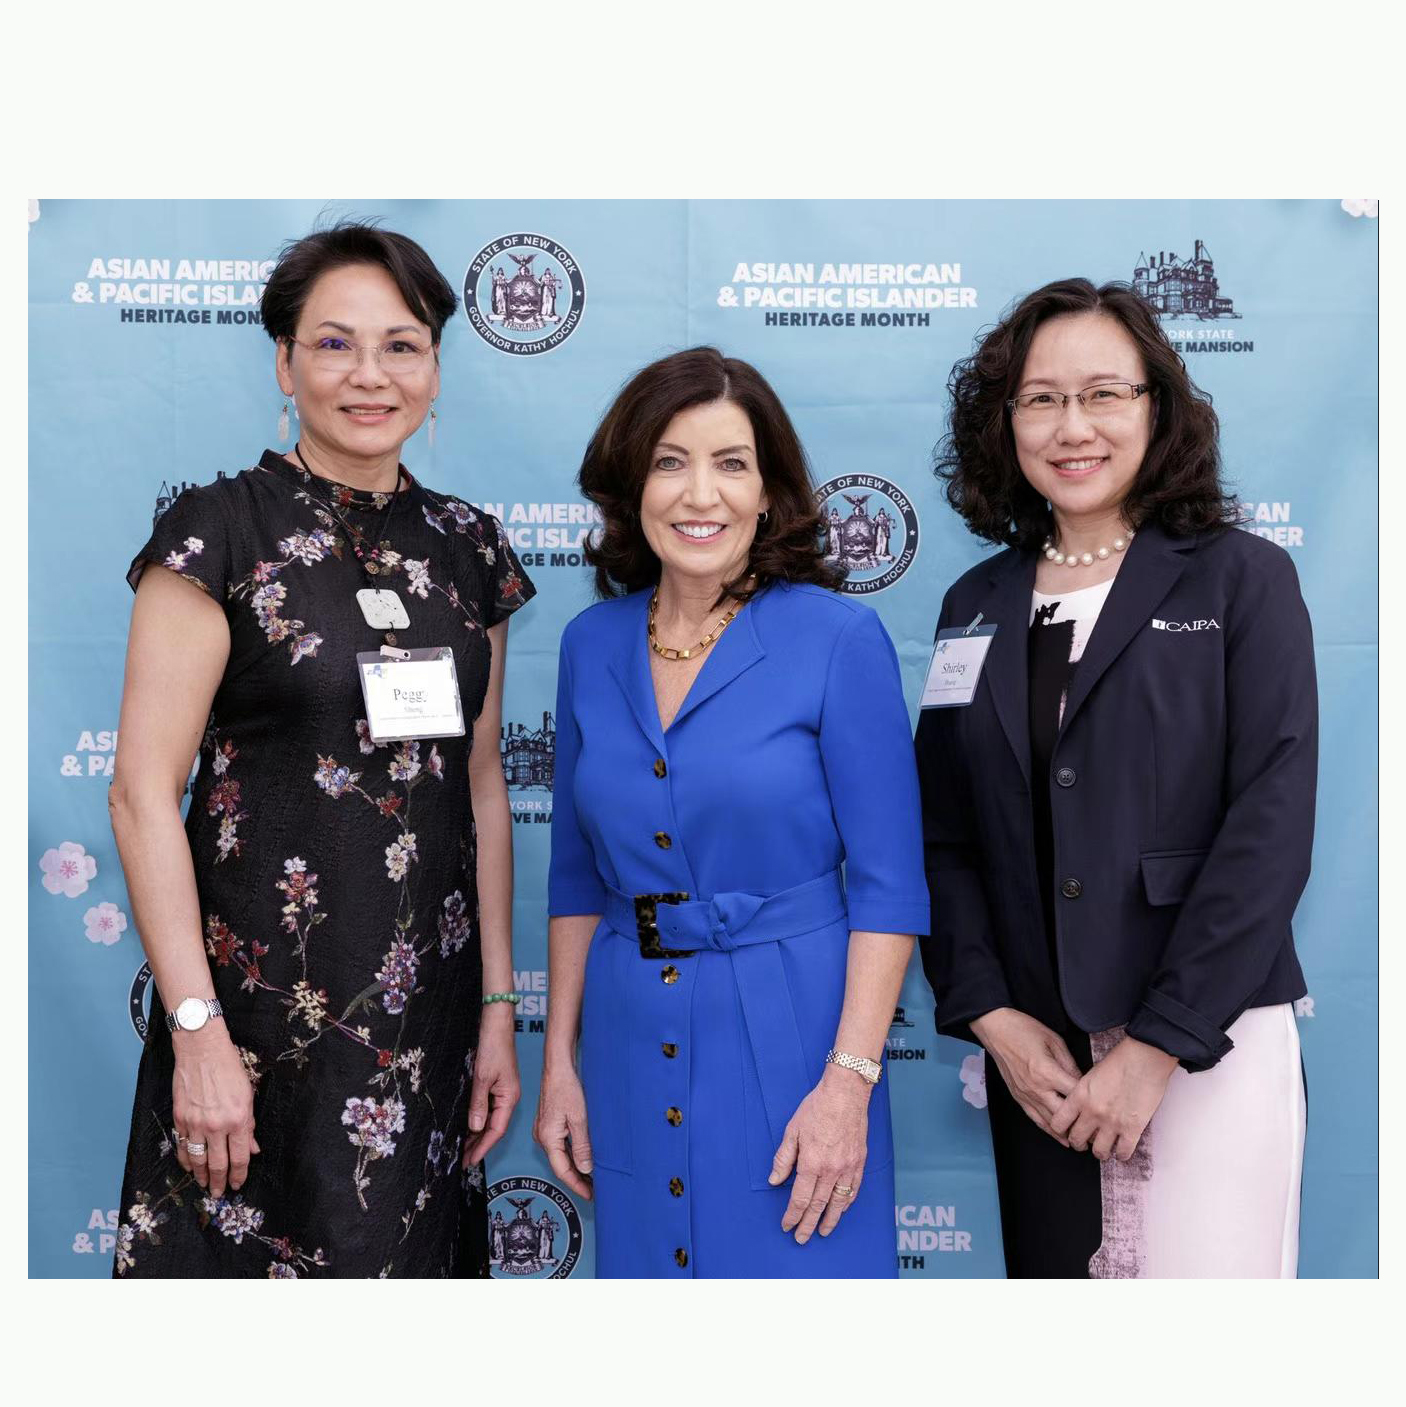 CAIPA attended Governors Hochuls AAPI reception